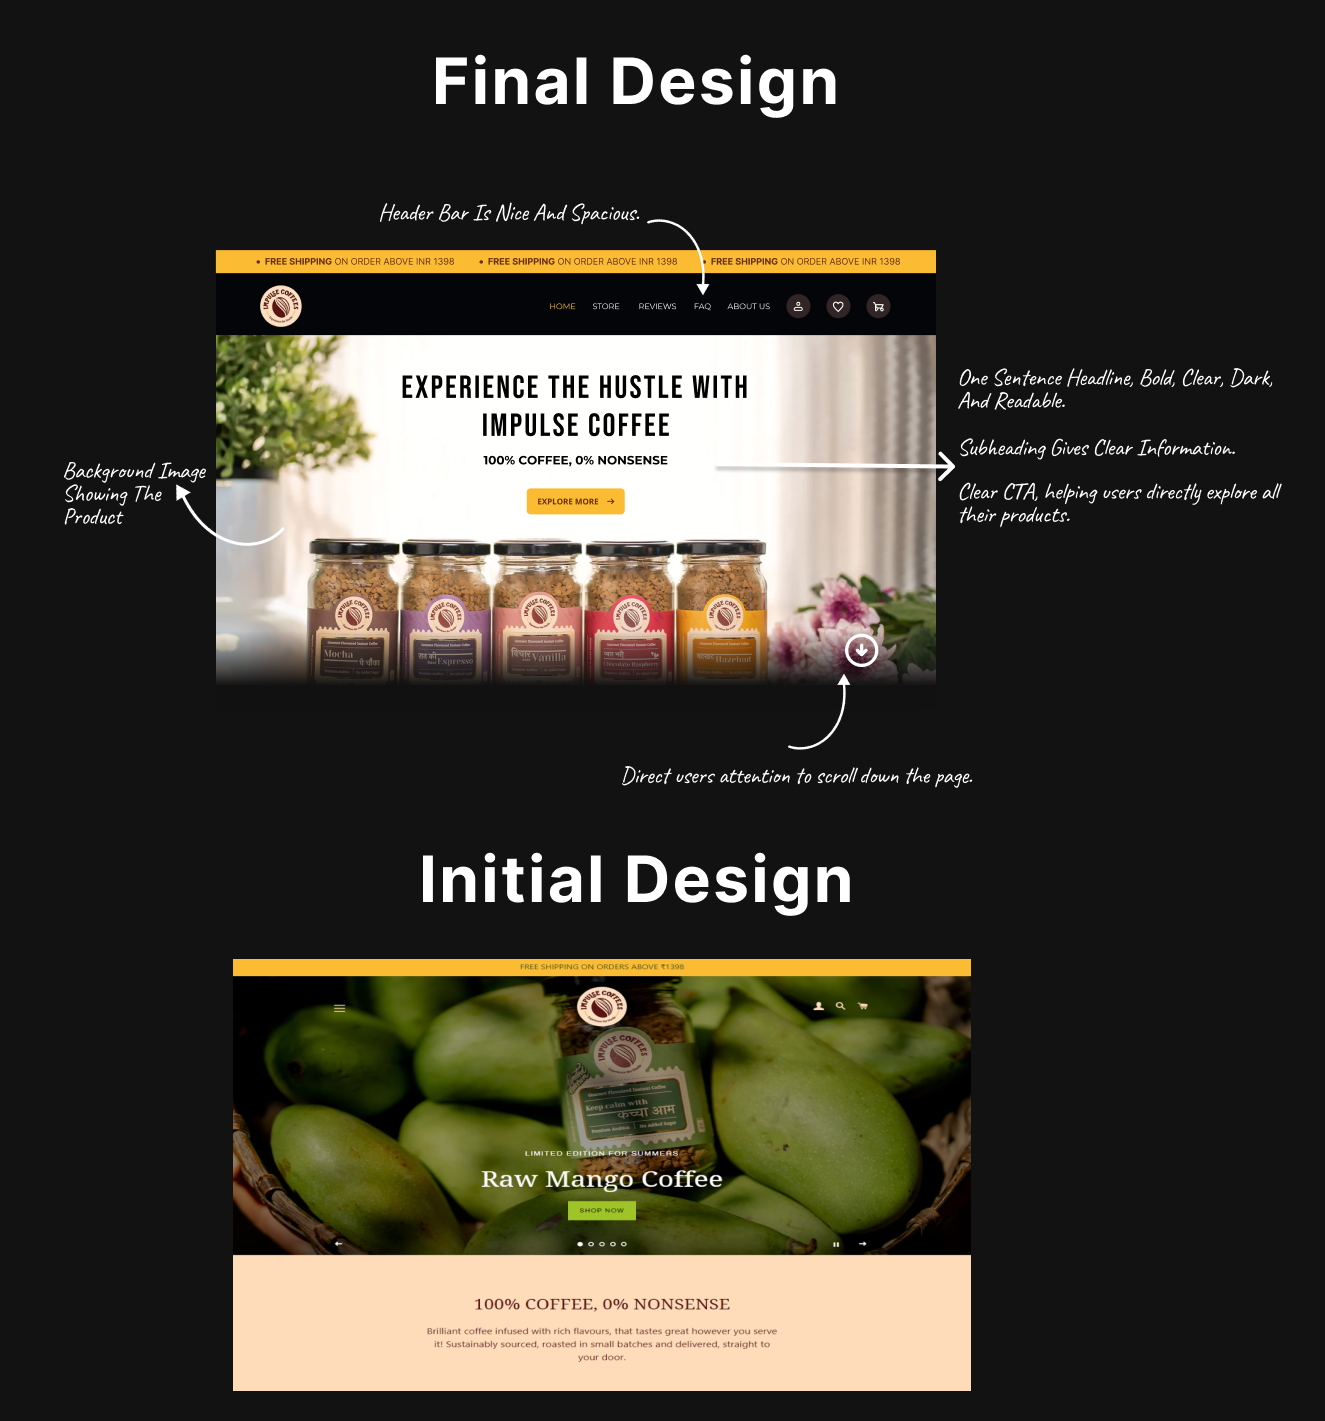 Case Study: iCoffee Product Launch